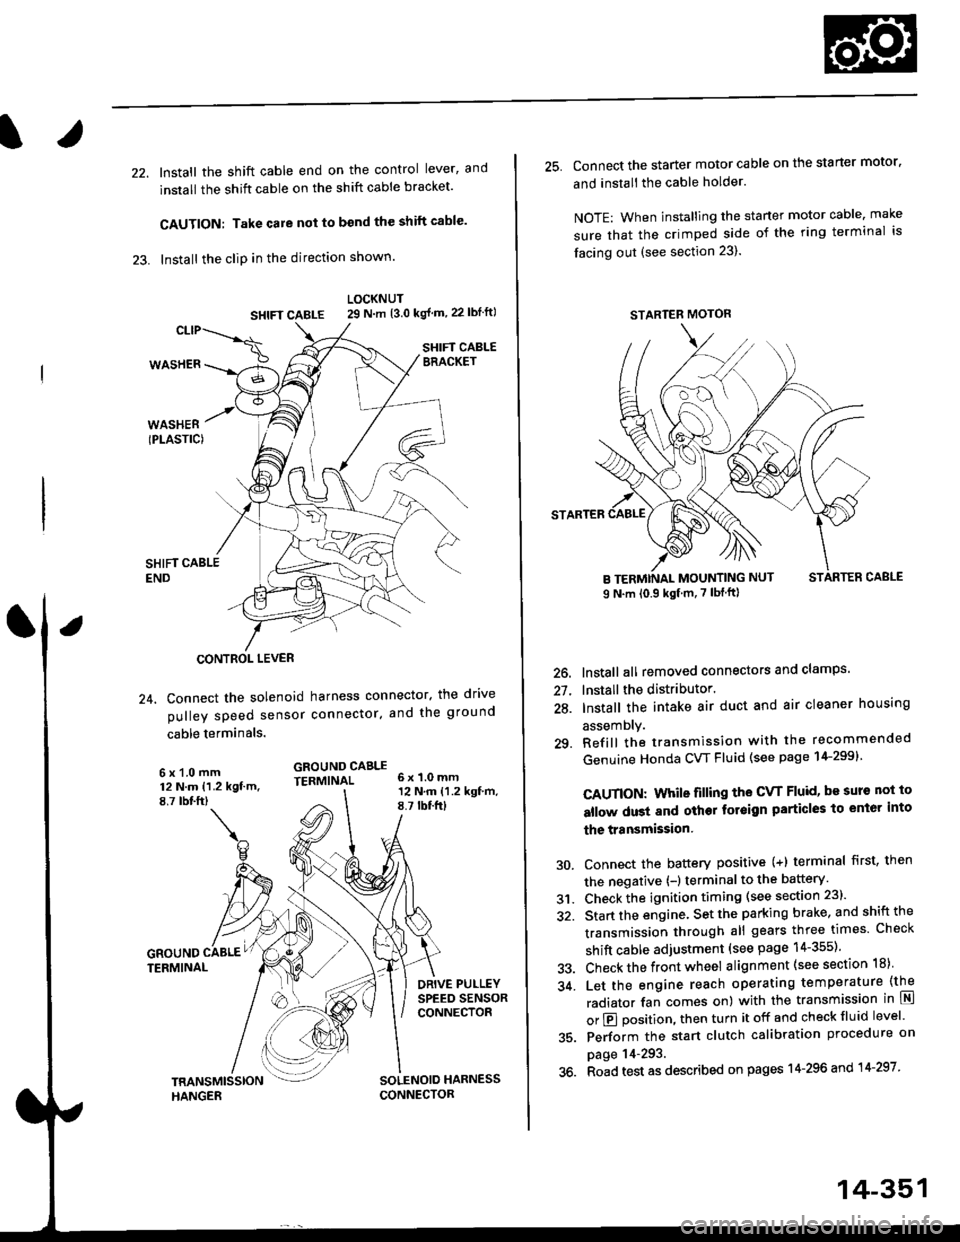 HONDA CIVIC 2000 6.G Workshop Manual 22. Install the shift cable end on the control lever, and
install the shift cable on the shift cable bracket
CAUTION: Take care not to bend the shift cable
23. lnstall the clip in the direction show